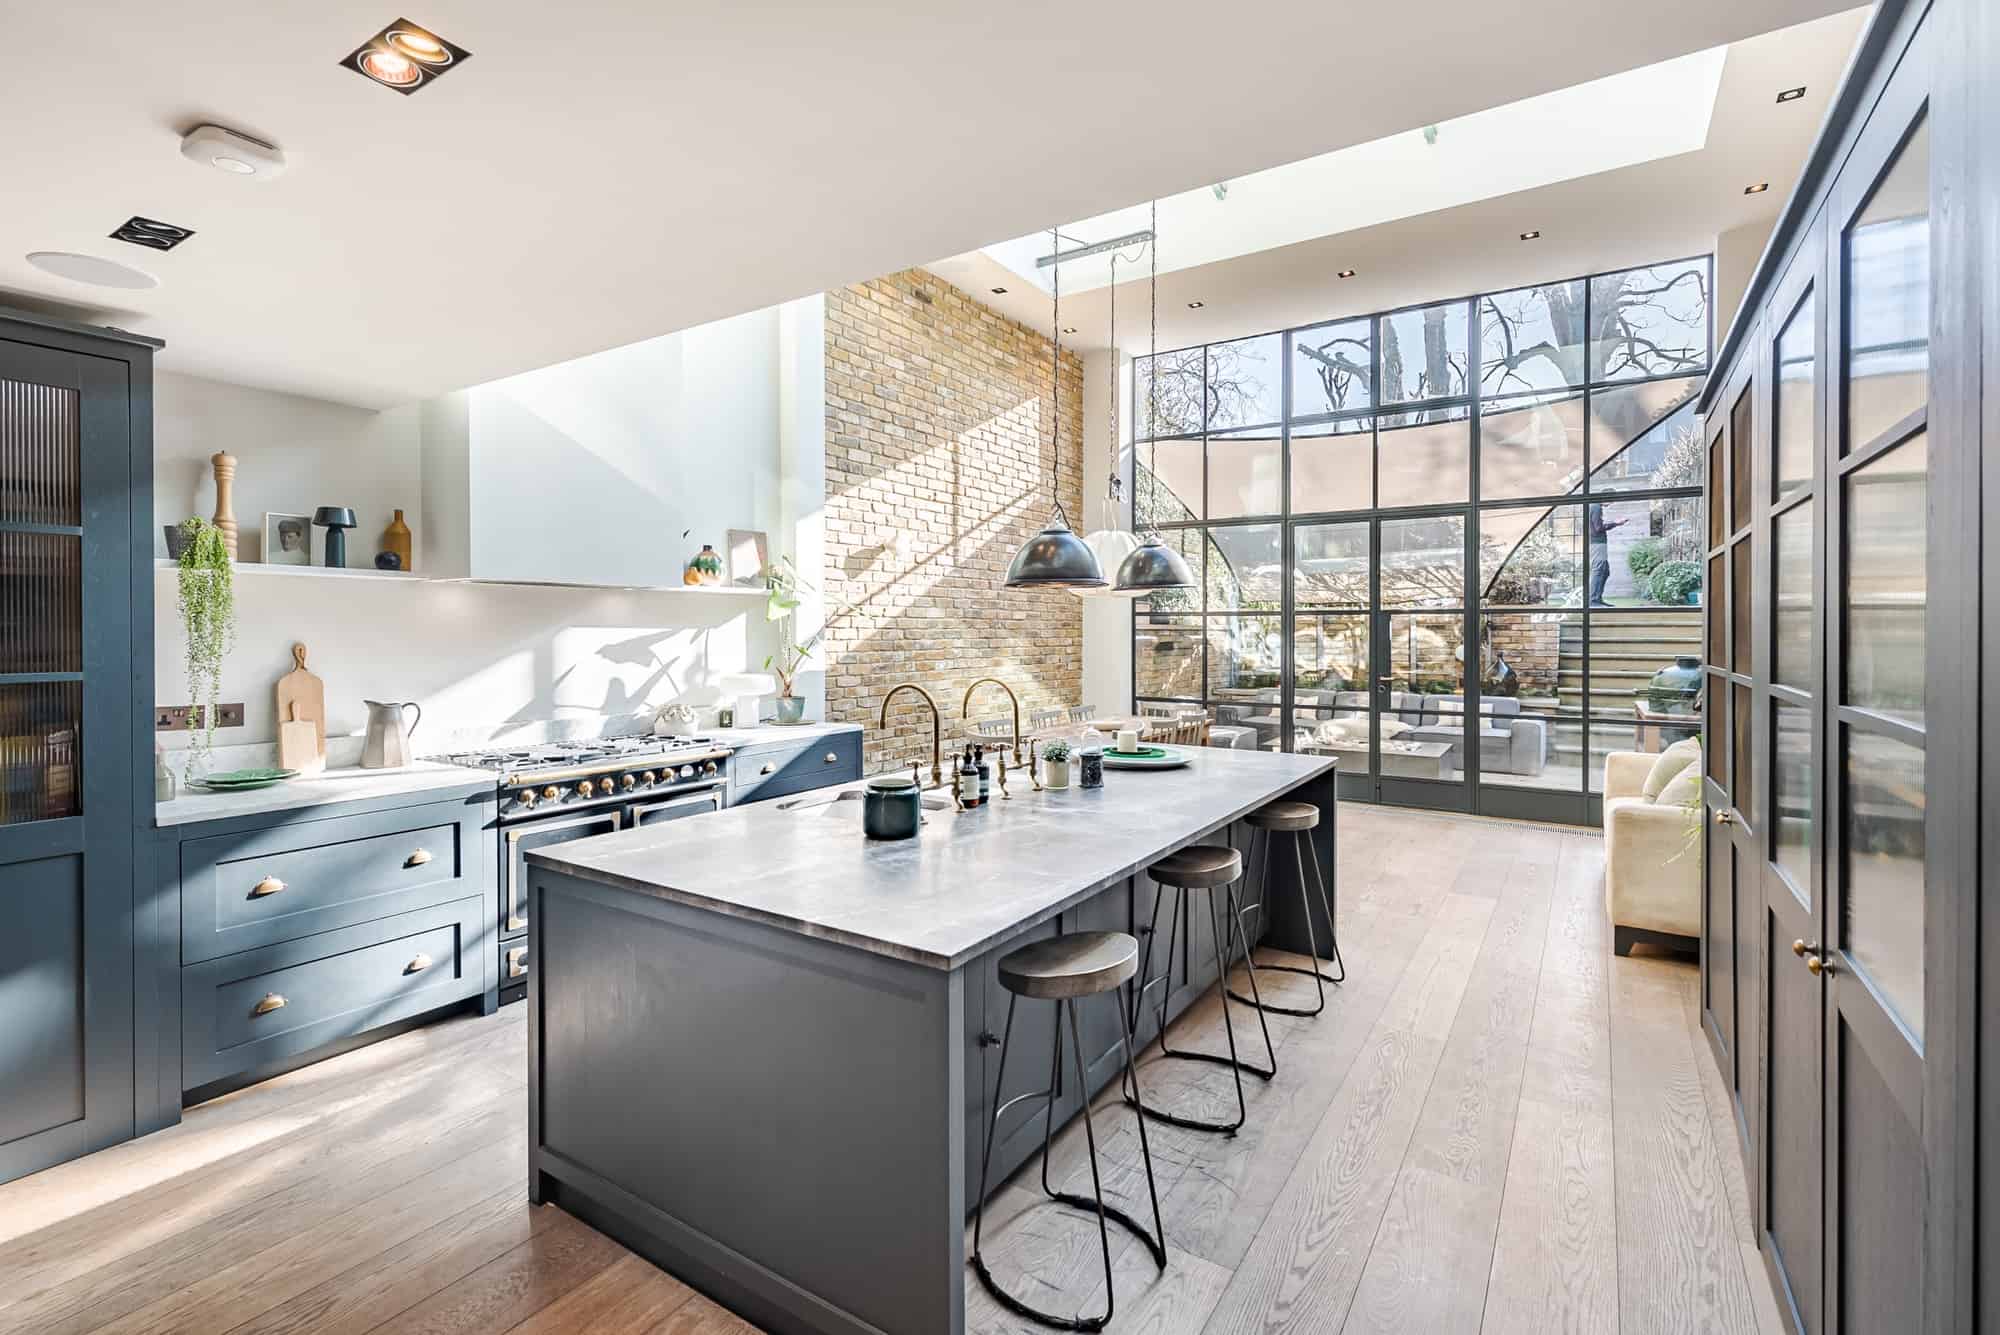 Eglantine SW18 - A contemporary home with beautifully styled interiors including large New York loft-style kitchen and living areas - The Location Guys